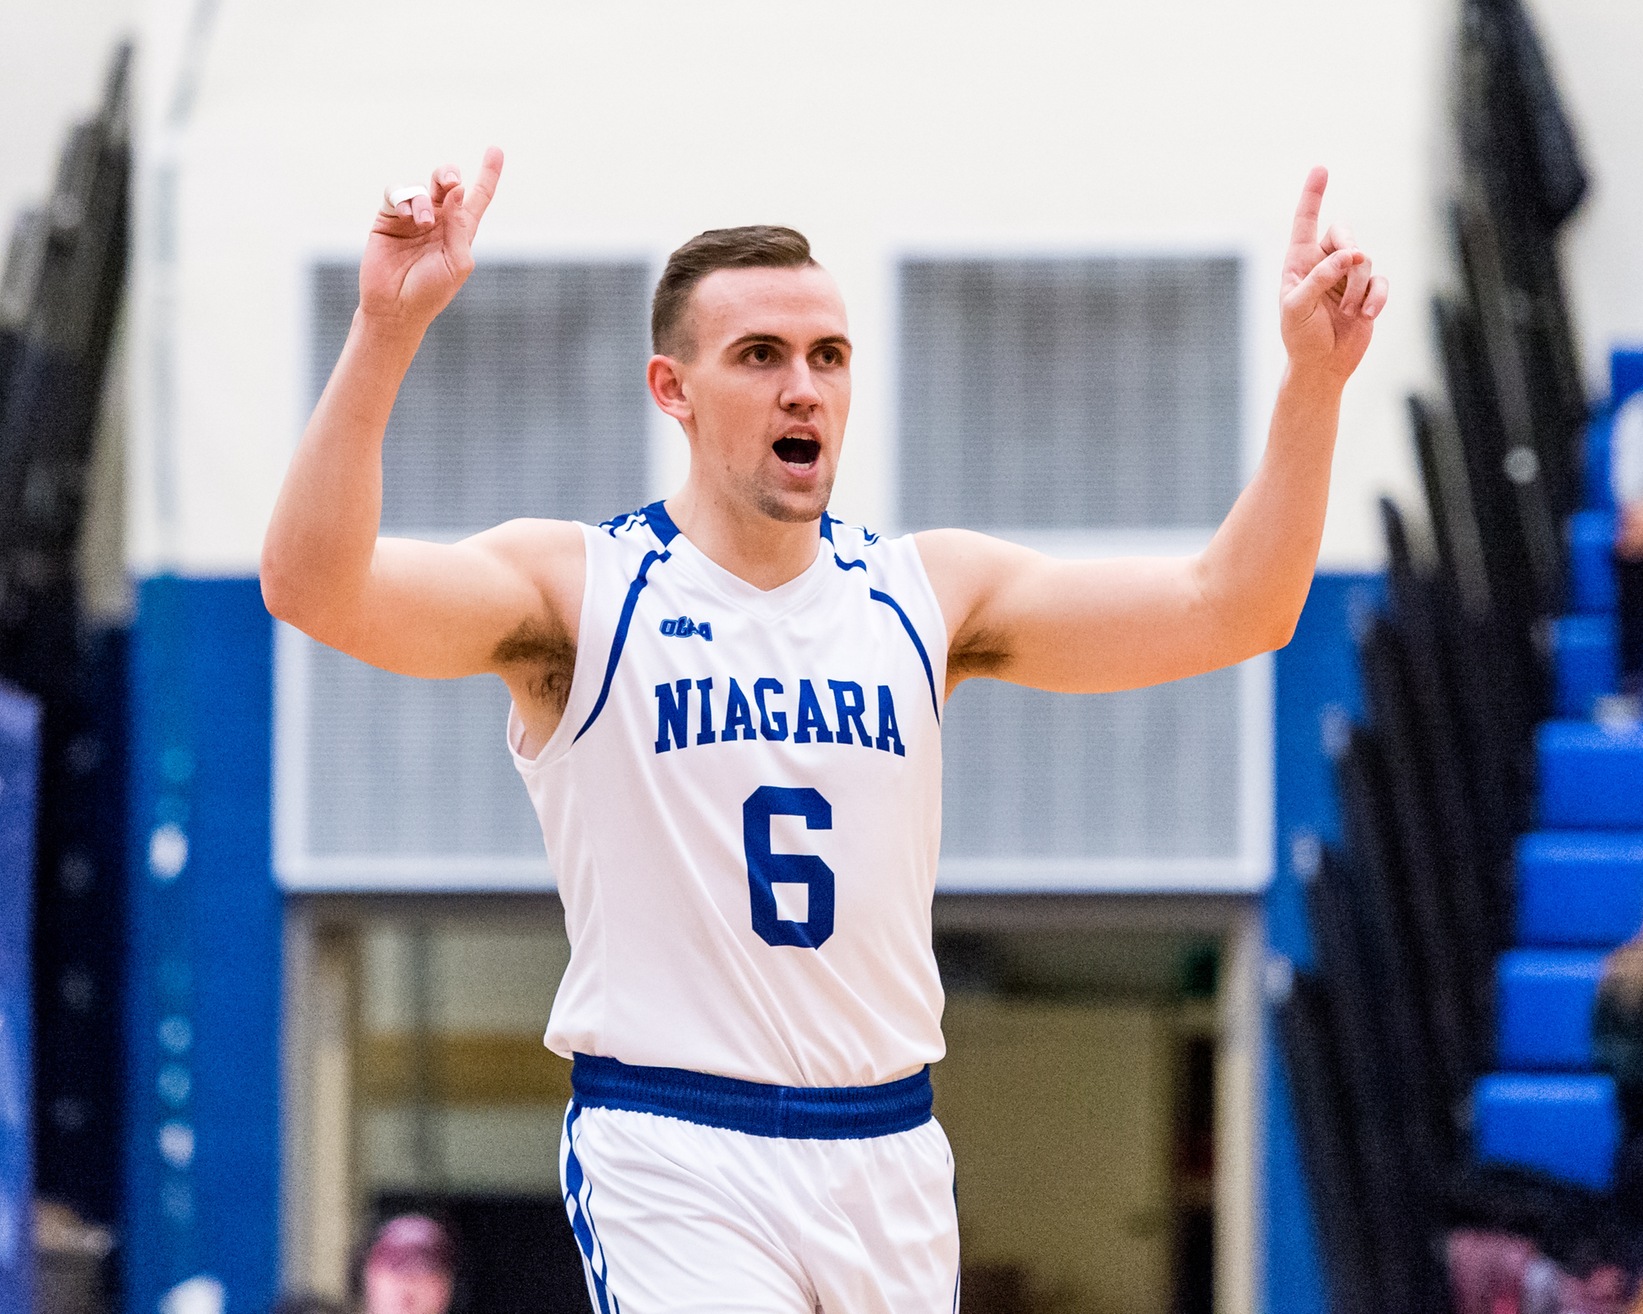 Knights come back to take down Georgian in OCAA Championship's opening round